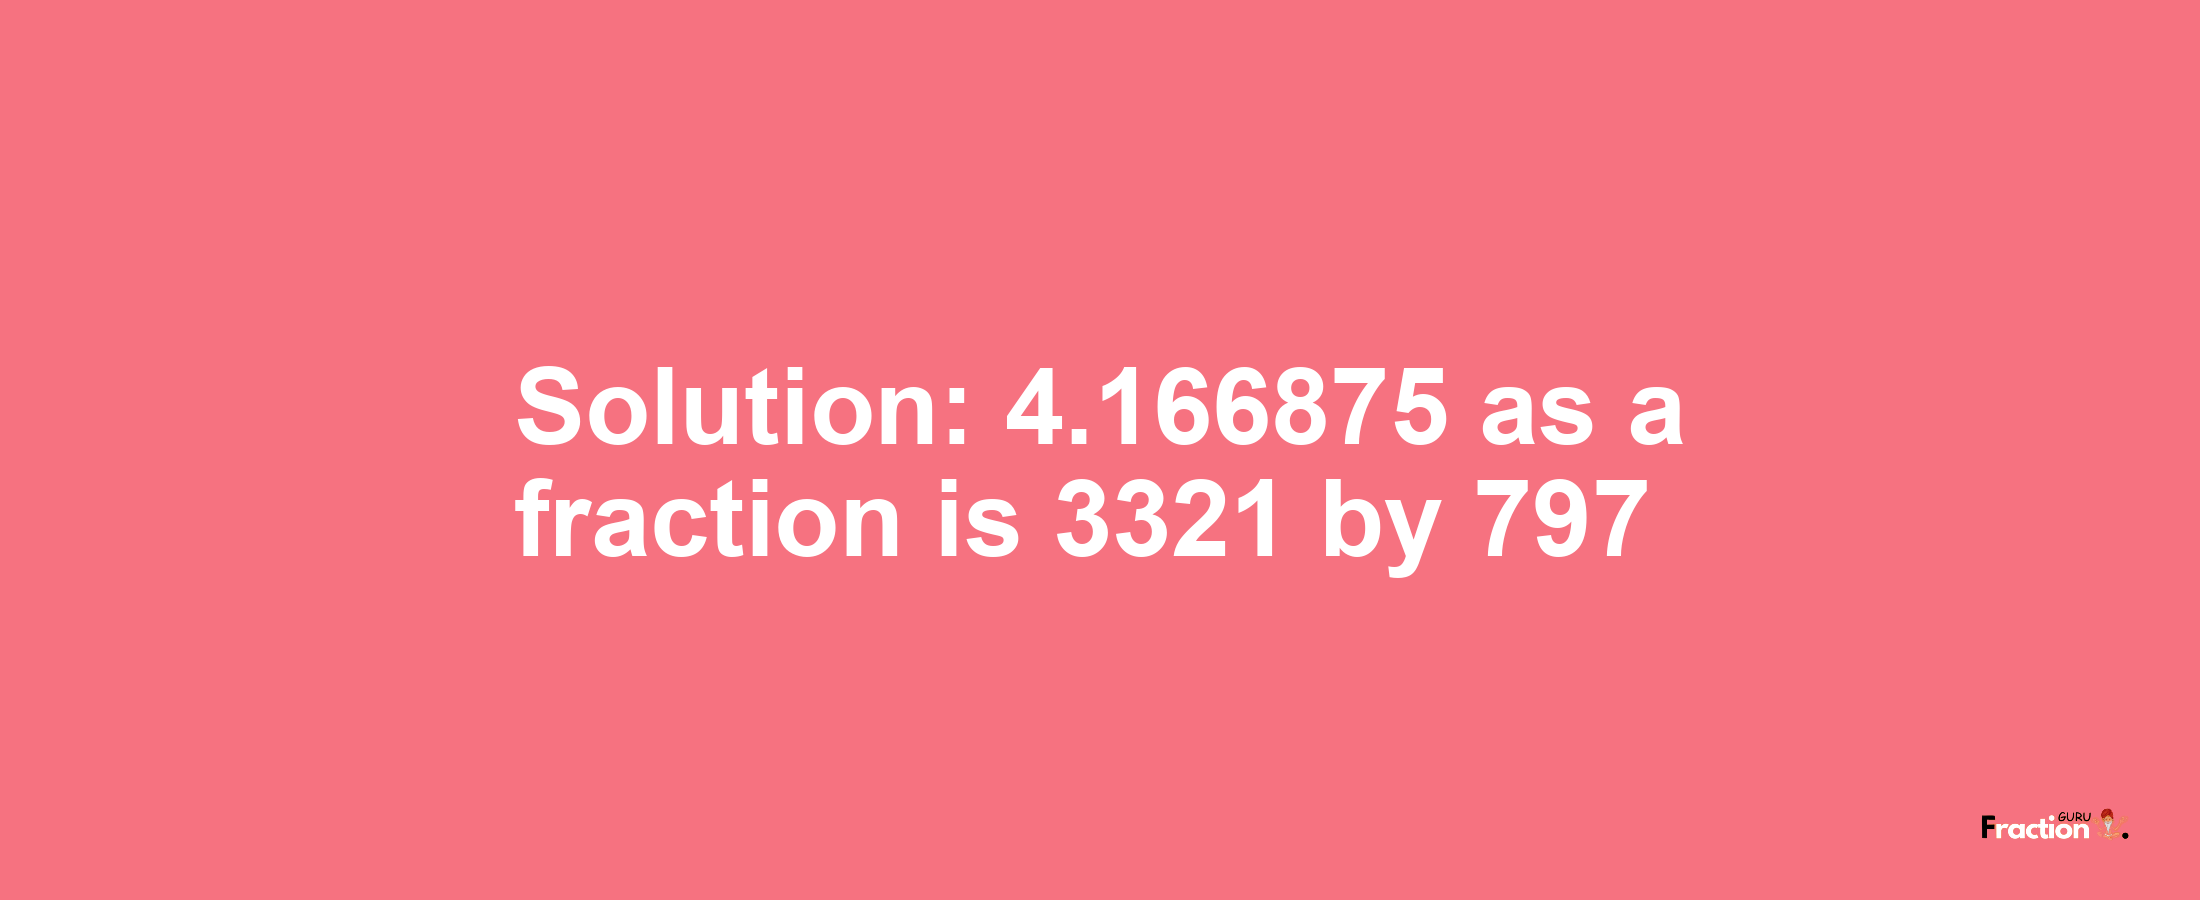 Solution:4.166875 as a fraction is 3321/797